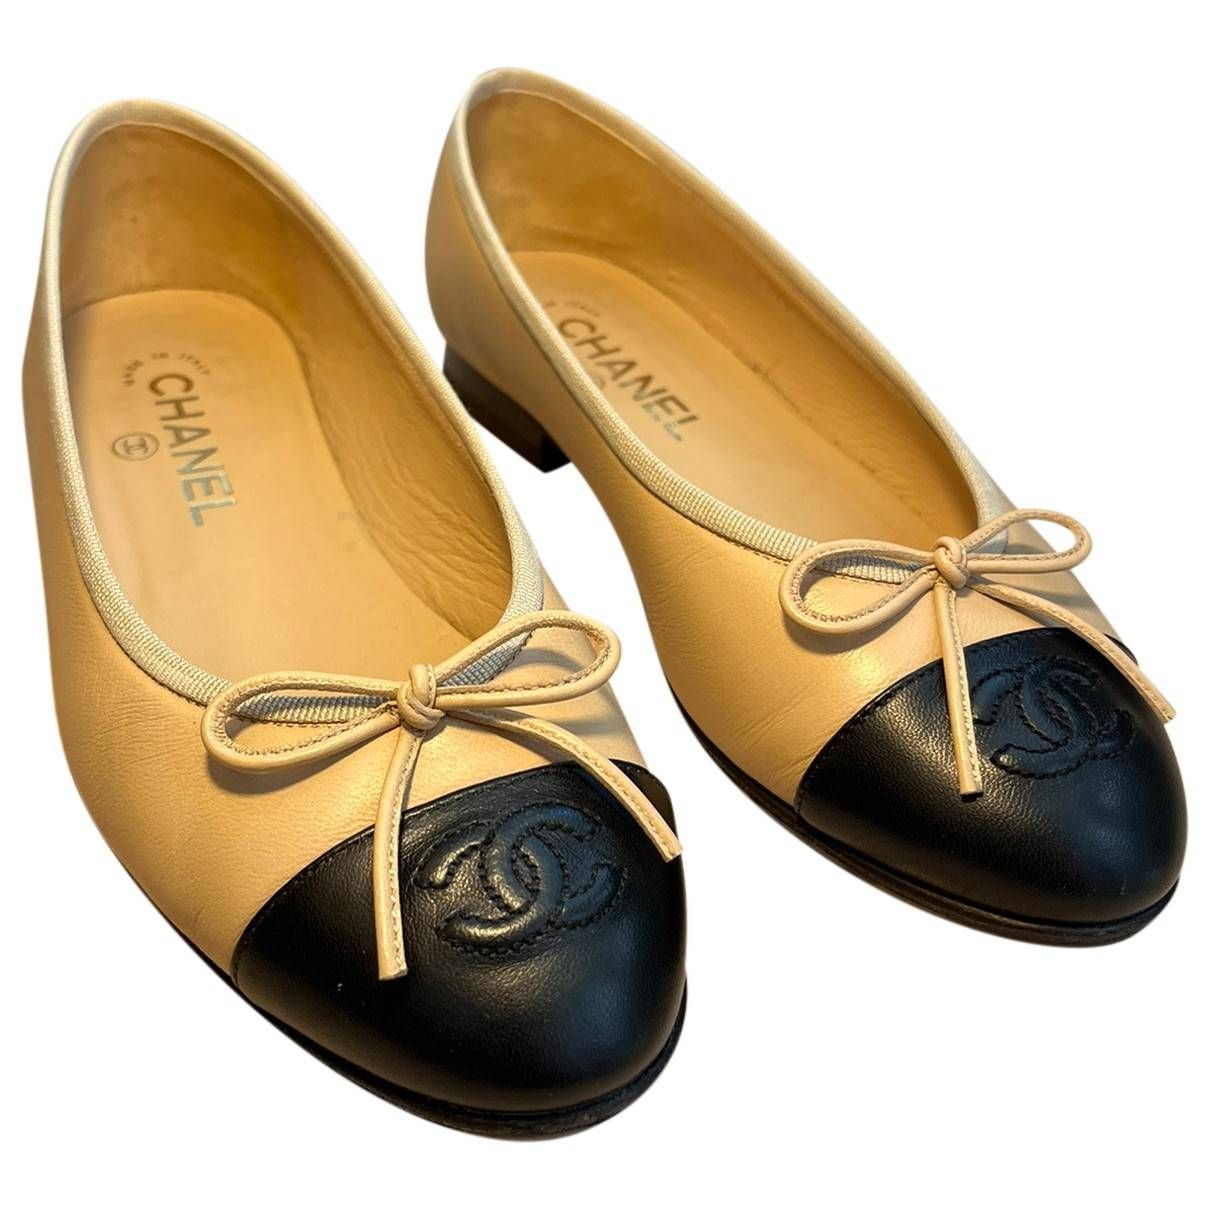 Where to buy ballet flat